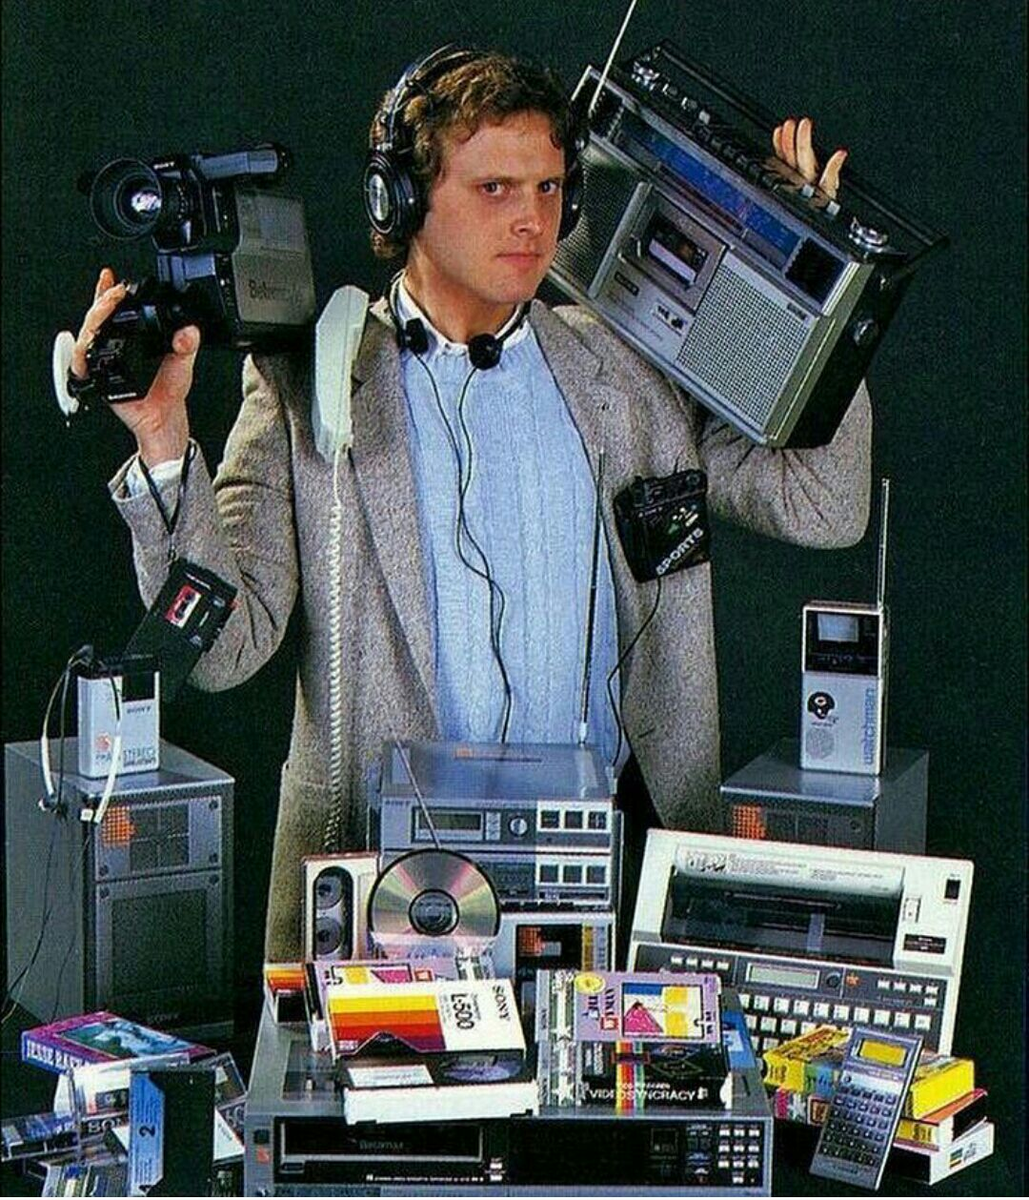 Image showing a man surrounded by tech gadgets from the 1980s and 90s